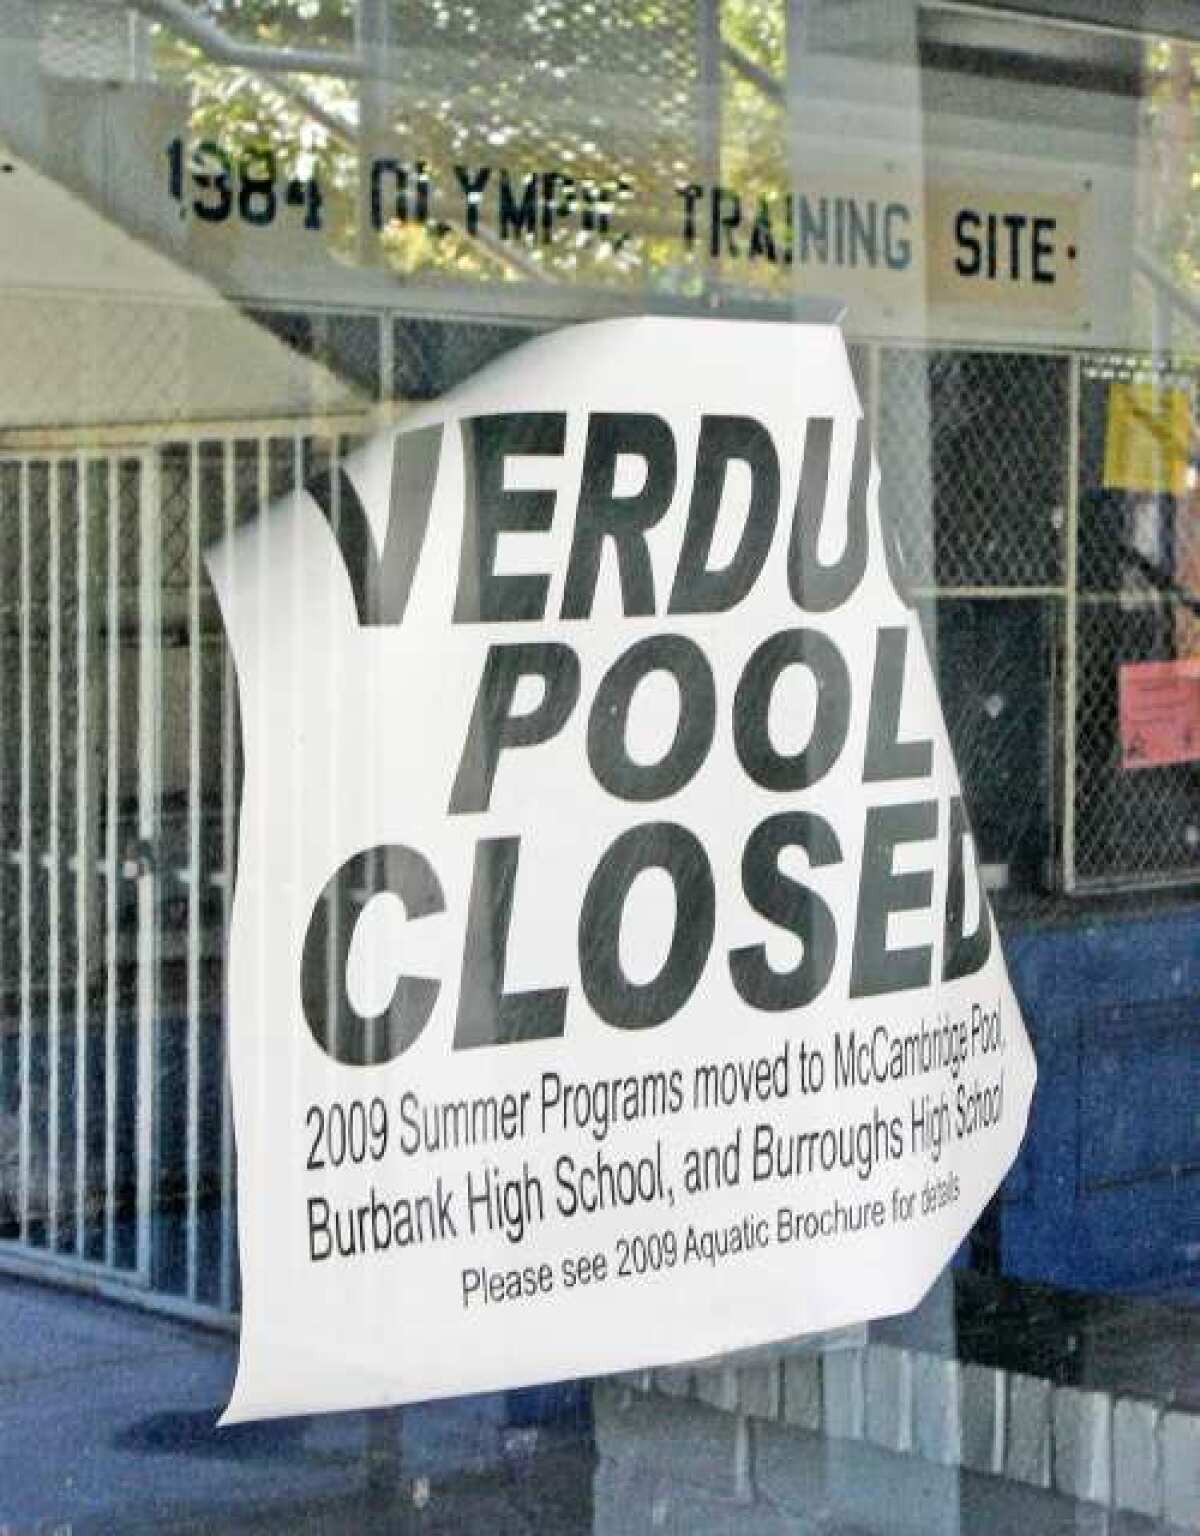 A sign, that seems to have been on the door since 2009, with the 1984 Olympic Training Site sign inside. The pool has been closed since 2008.